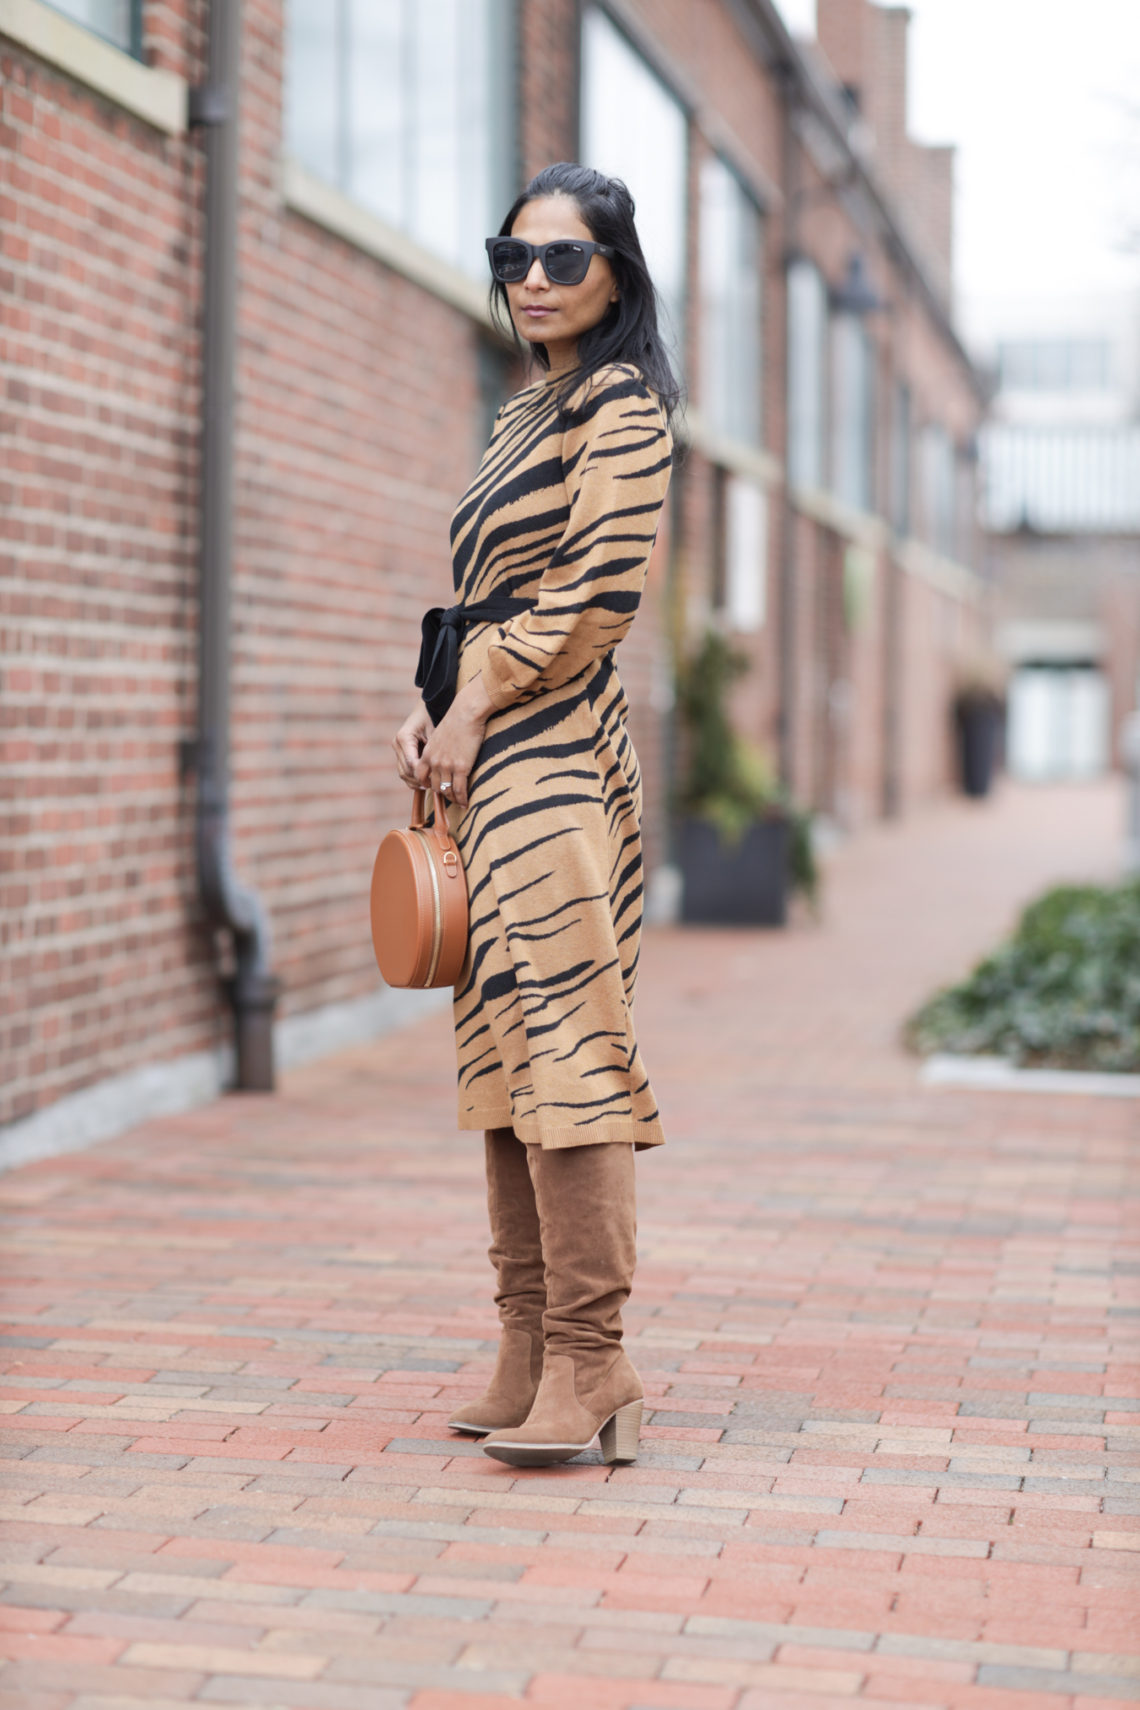 Sweater dress for easy winter style